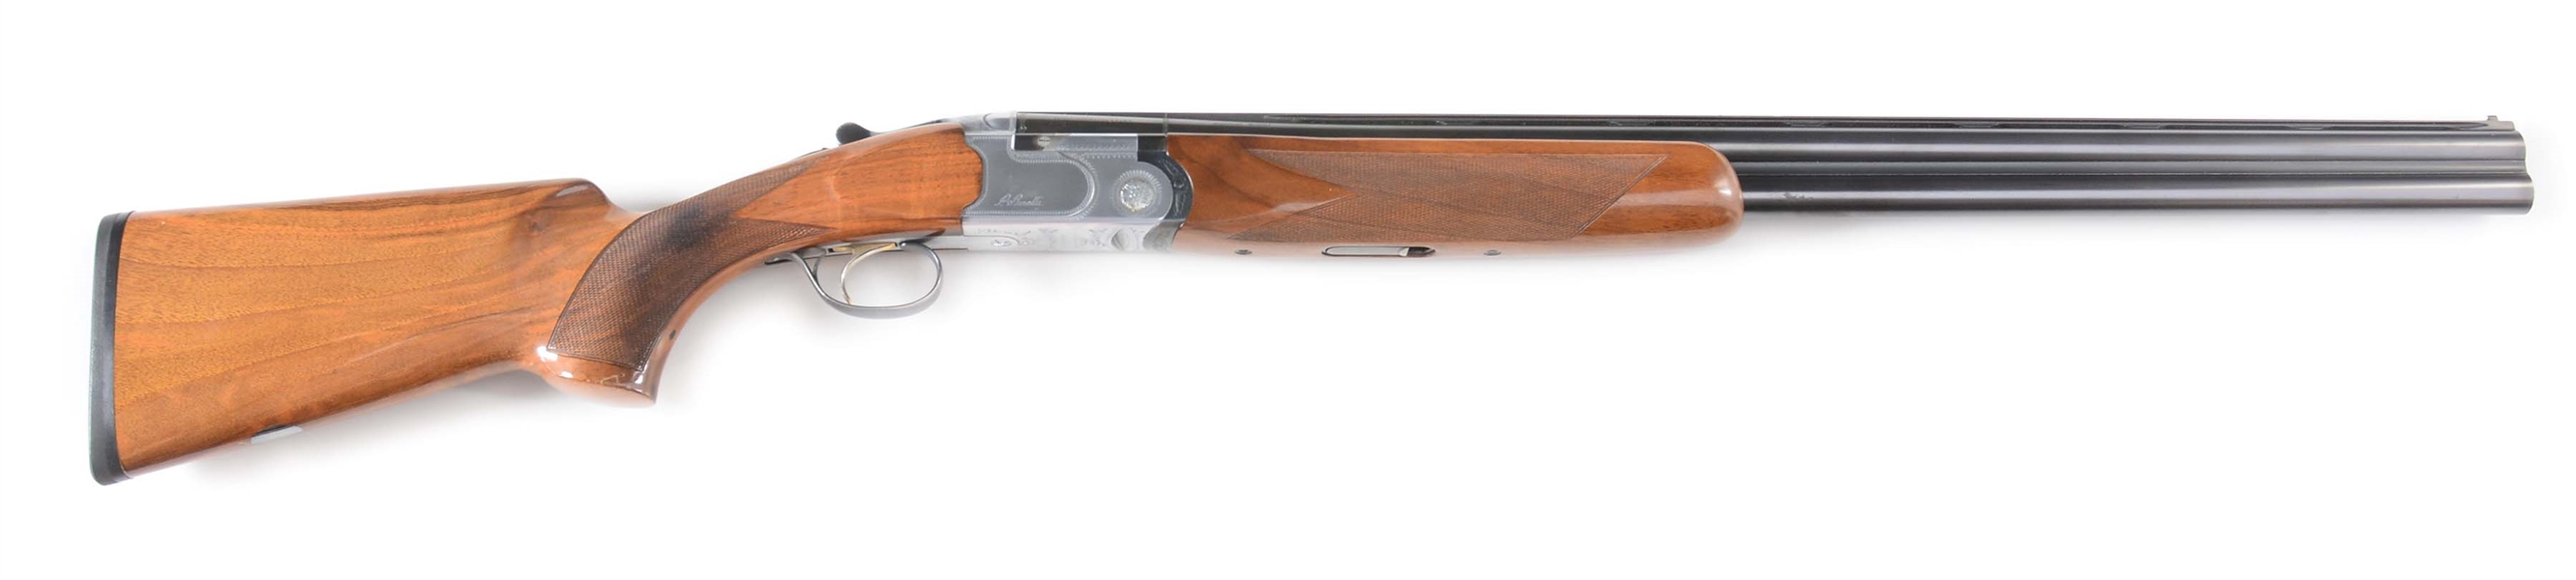 (M) BERETTA "S-680" OVER/UNDER 12 BORE SHOTGUN WITH CASE AND FULL SET OF BRILEY INSERTS.